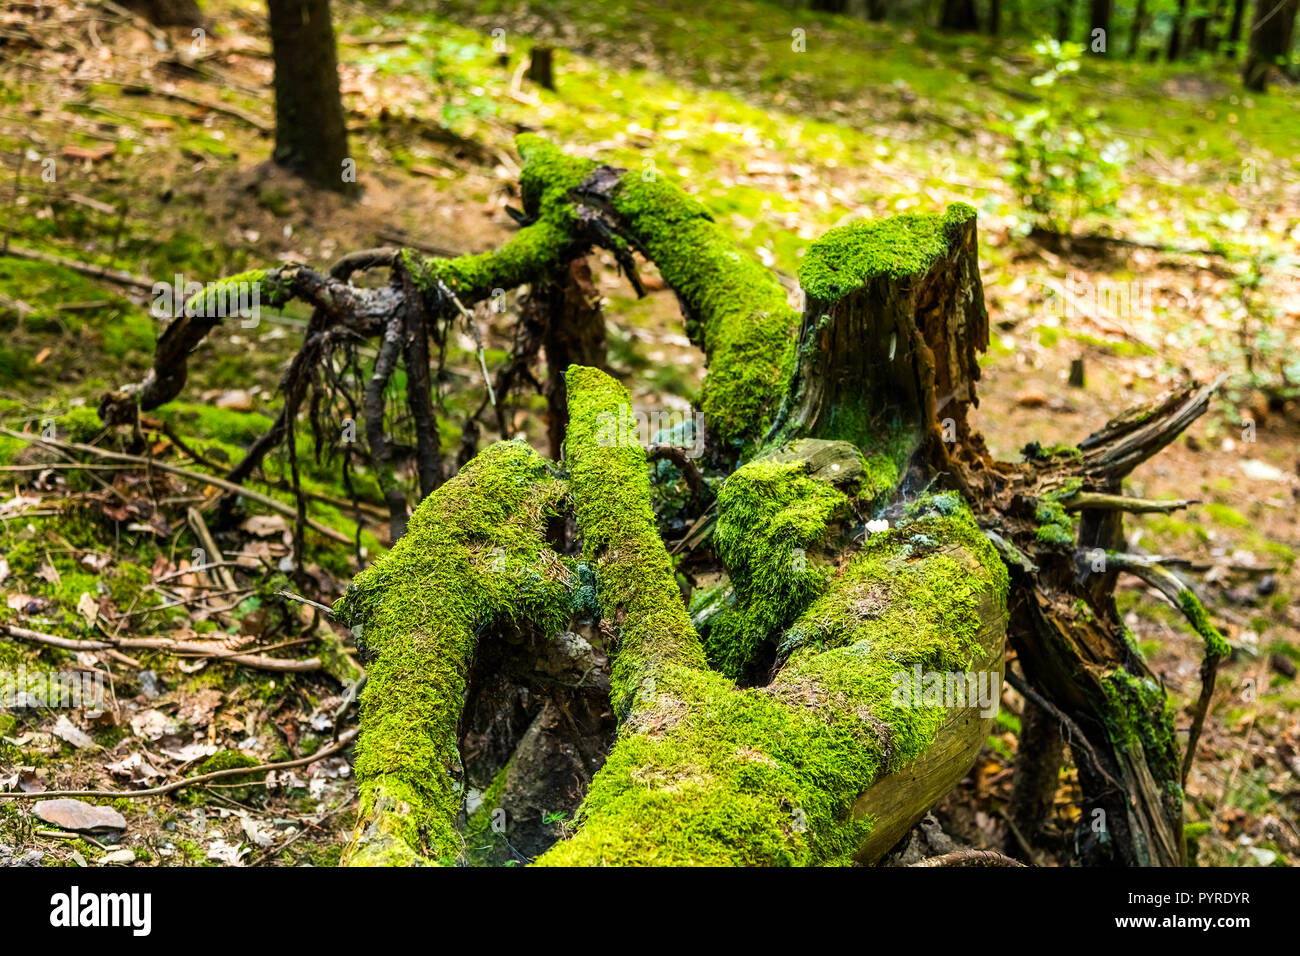 The primeval forest with mossed stump Stock Photo